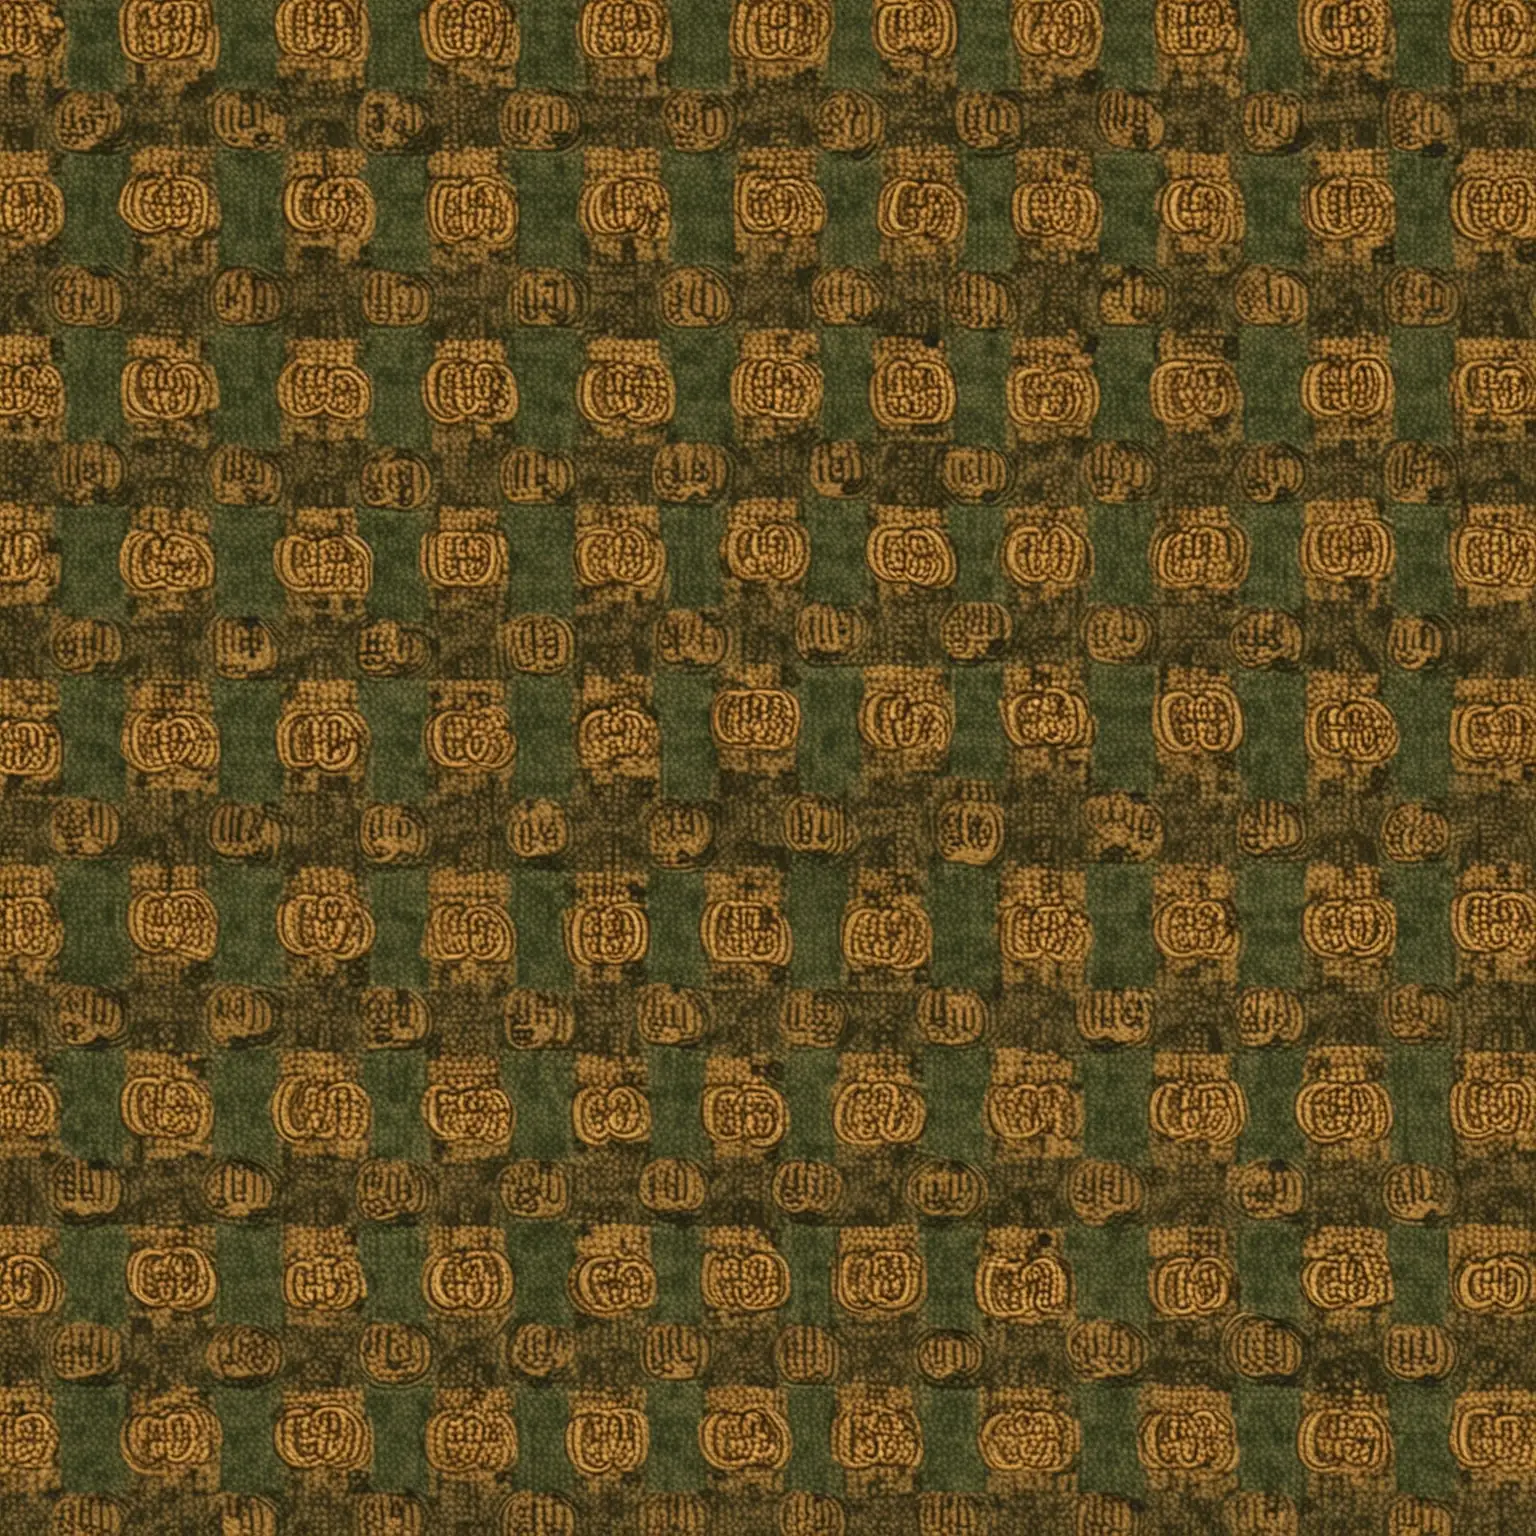 A green, brown and gold gucci pattern background